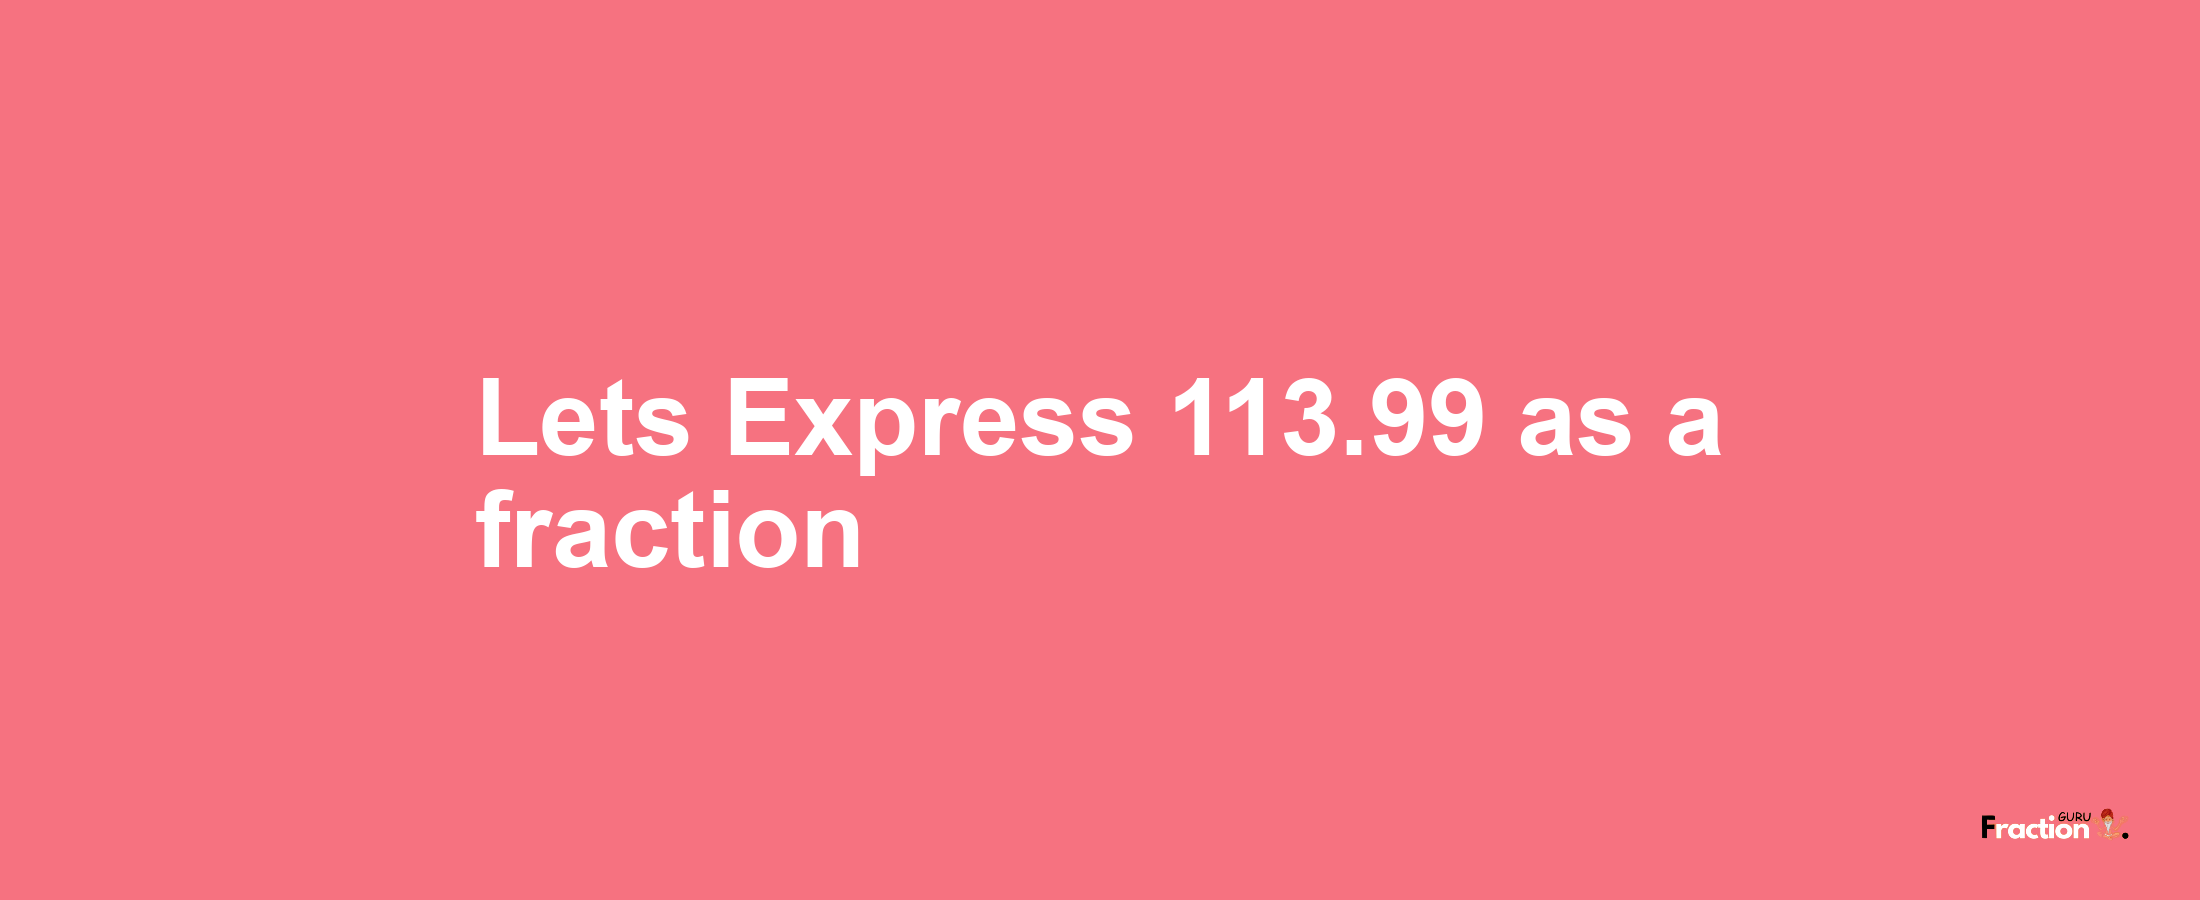 Lets Express 113.99 as afraction